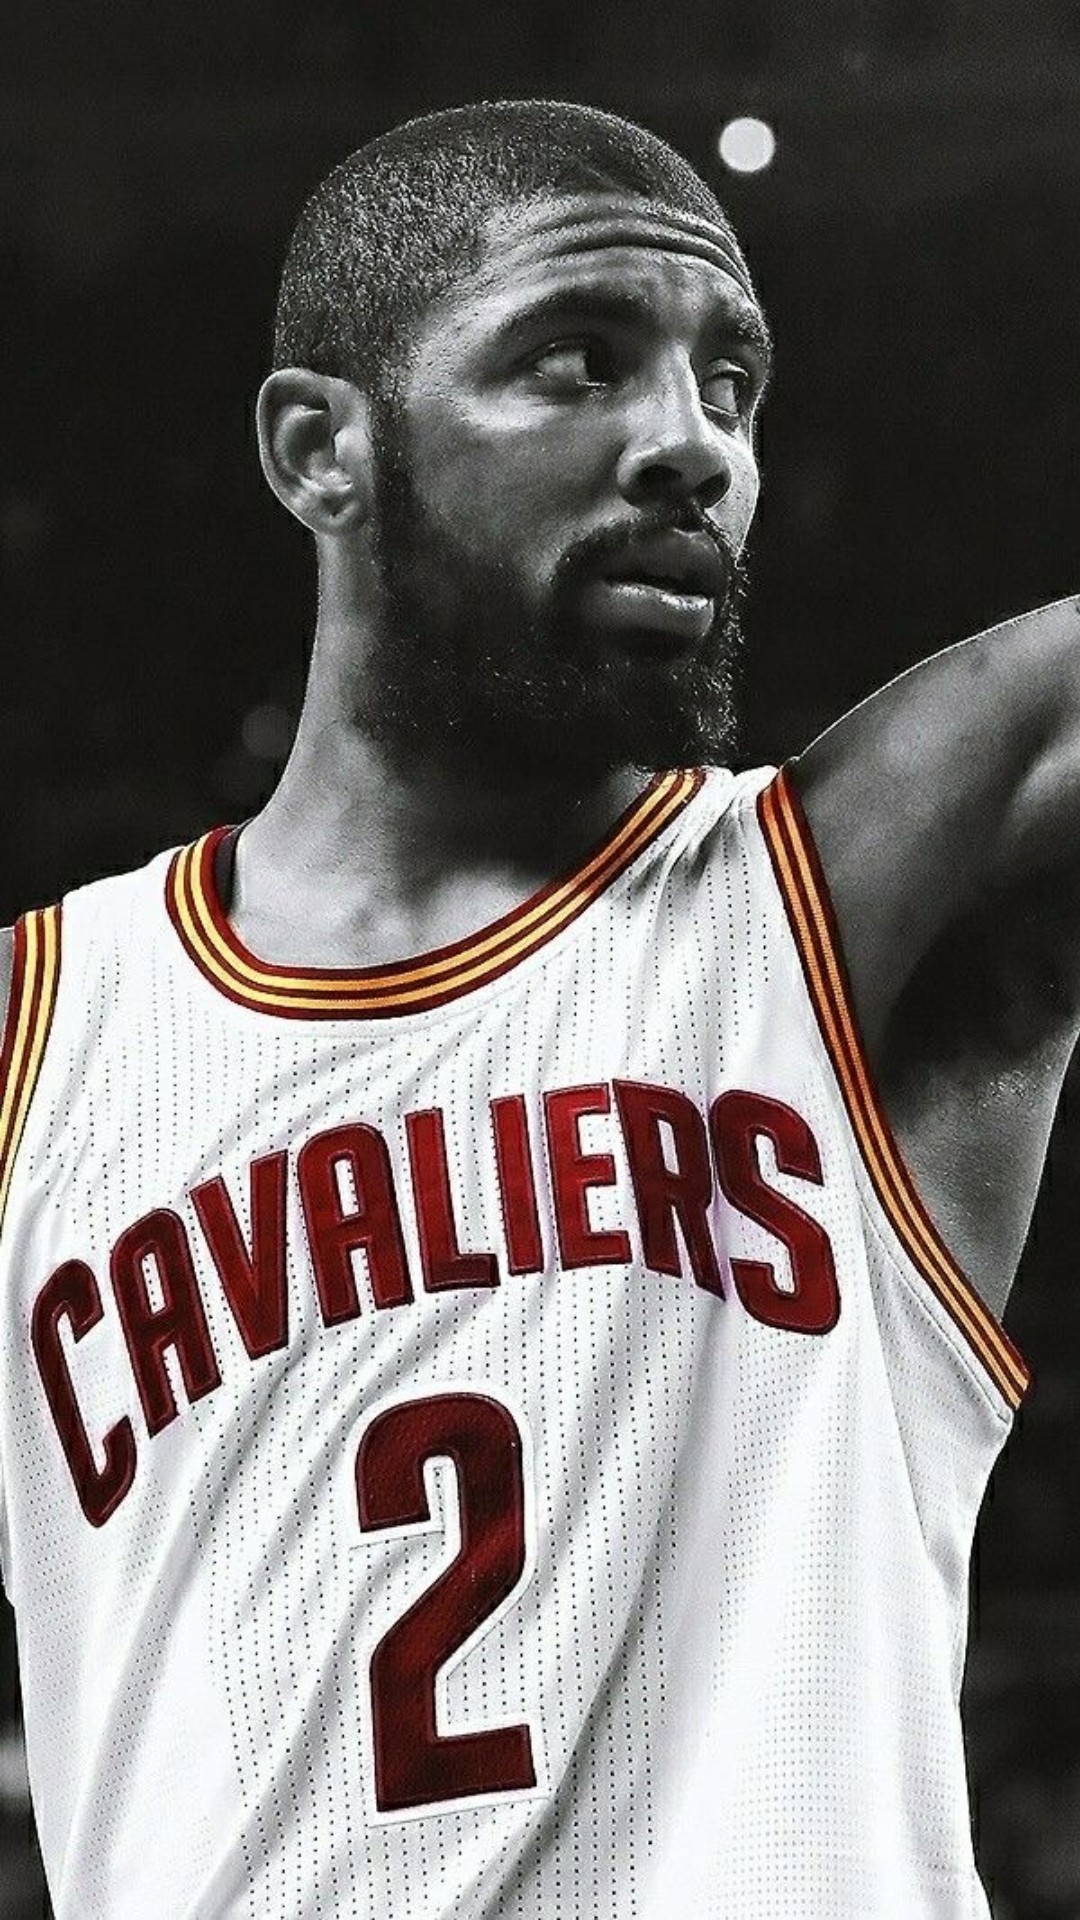 HD irving wallpapers